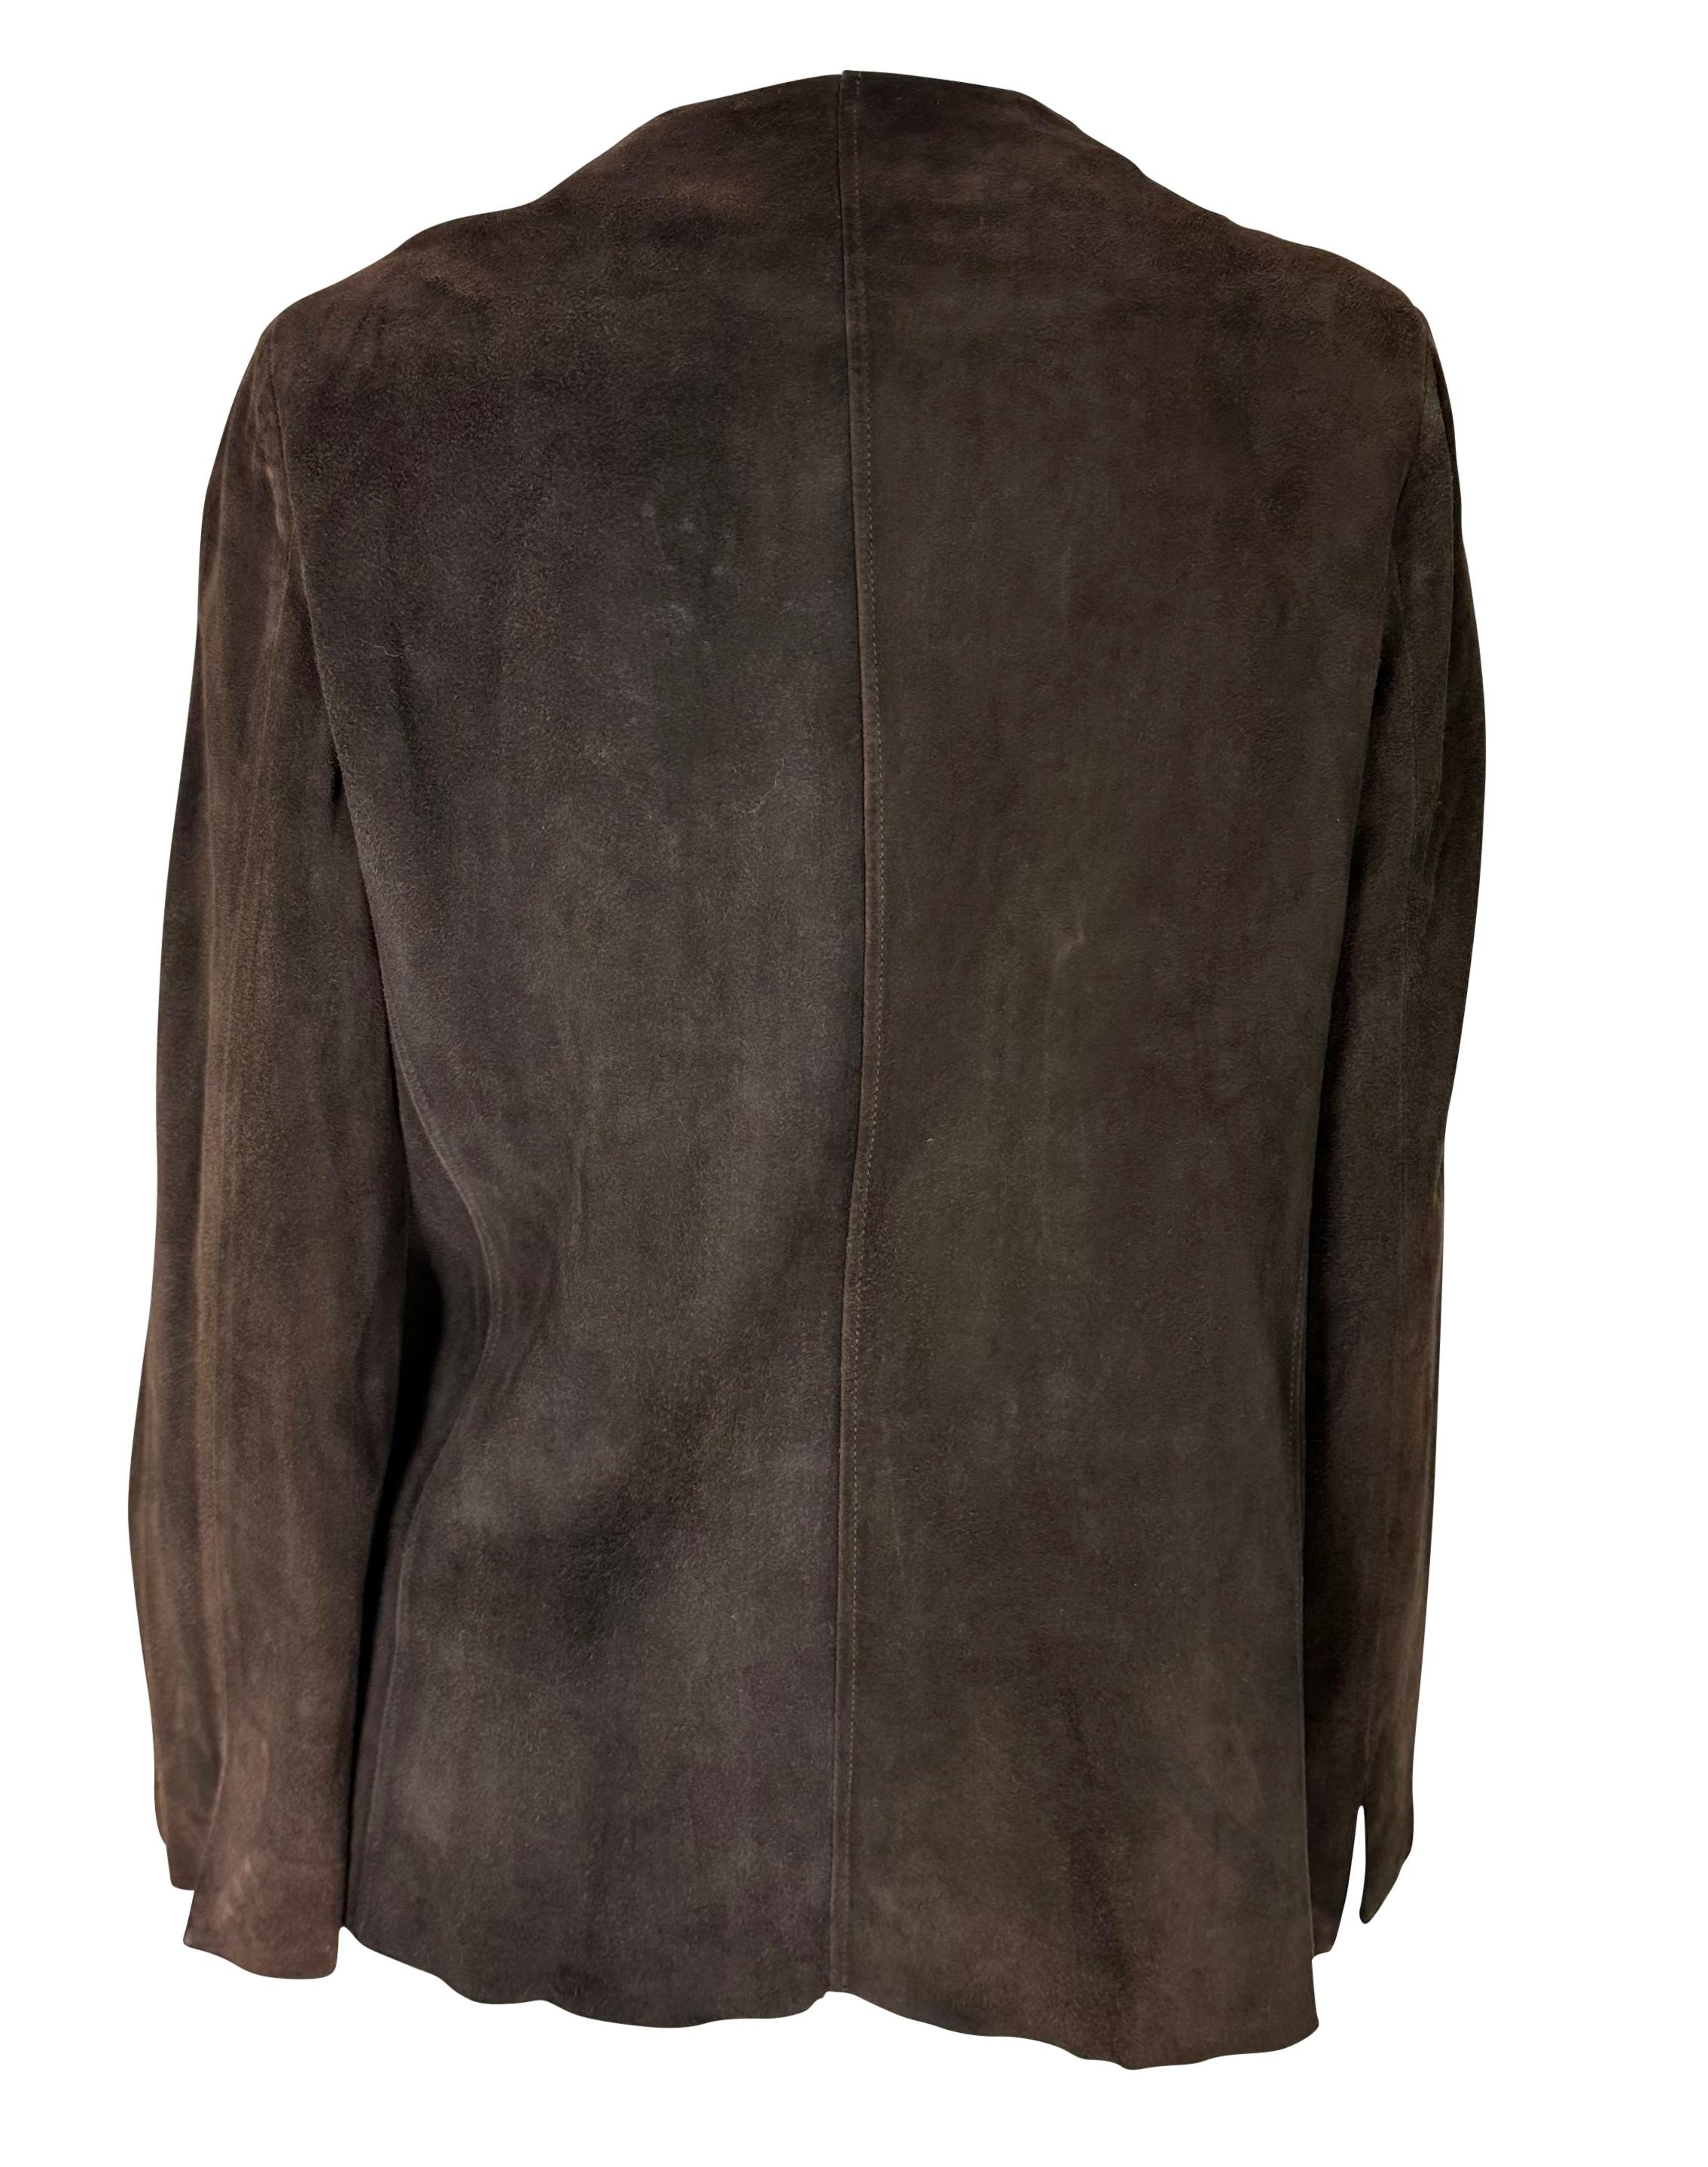 S/S 1997 Gucci by Tom Ford Naomi Runway Brown Suede Open Blouse Jacket For Sale 1